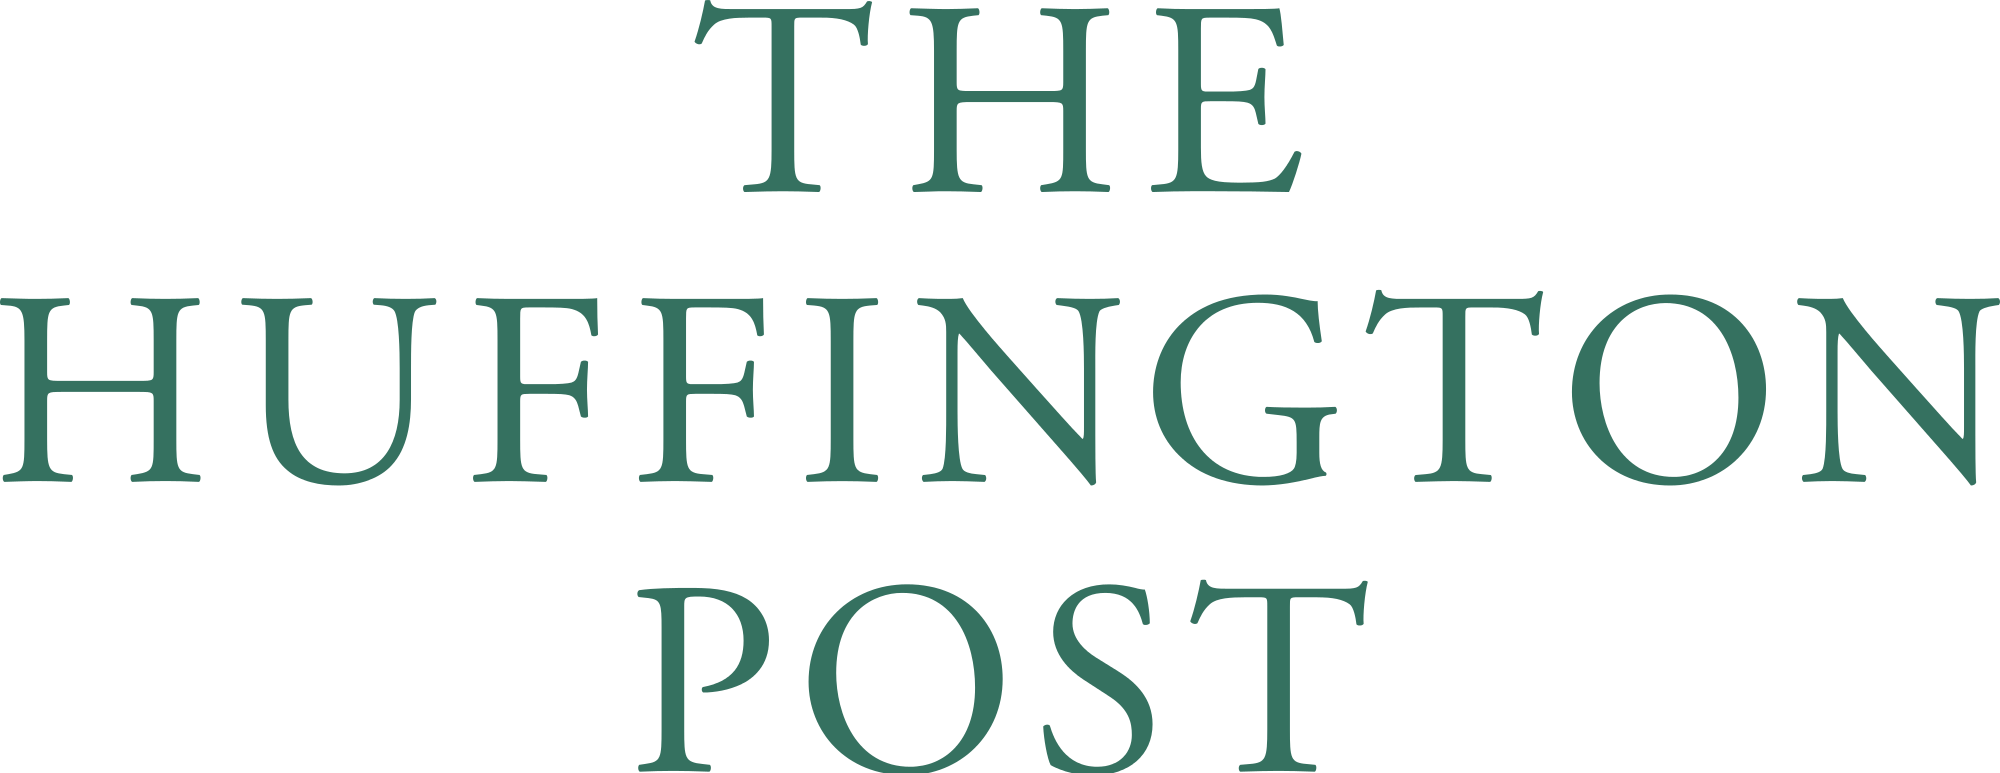 2000px-The_Huffington_Post_logo.svg.png